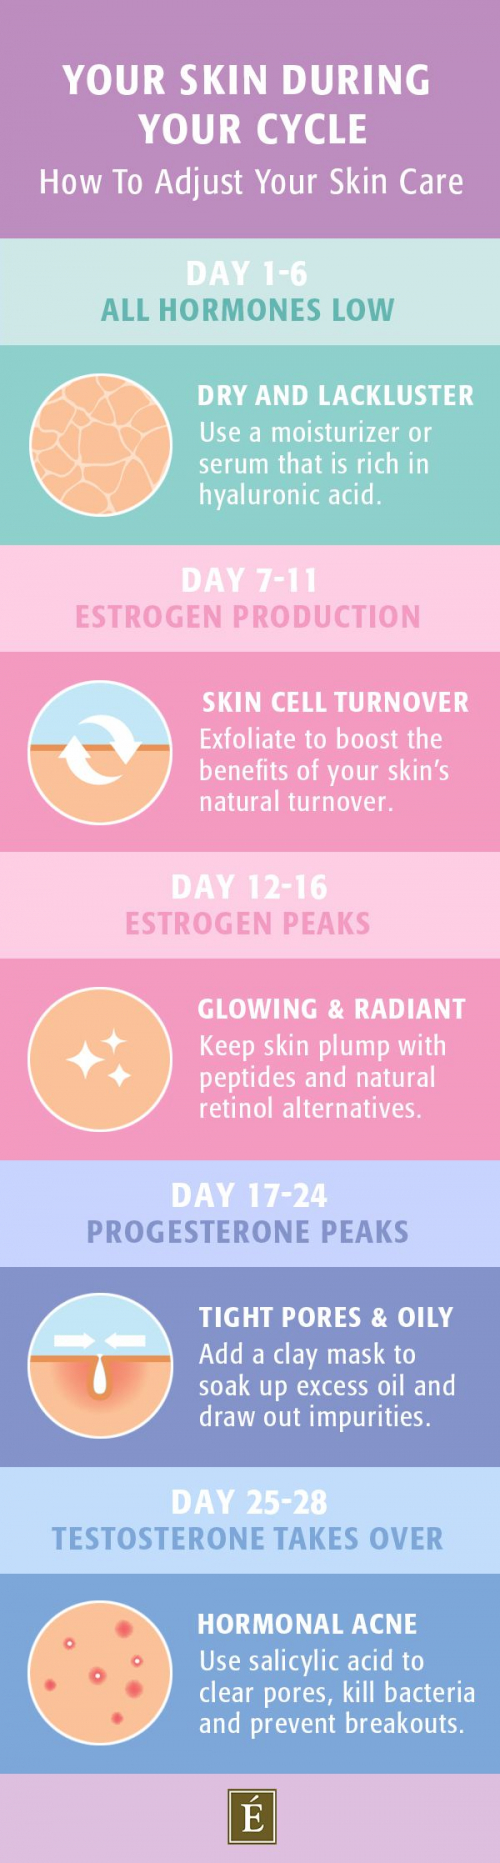 skin care during your monthly cycle diagram